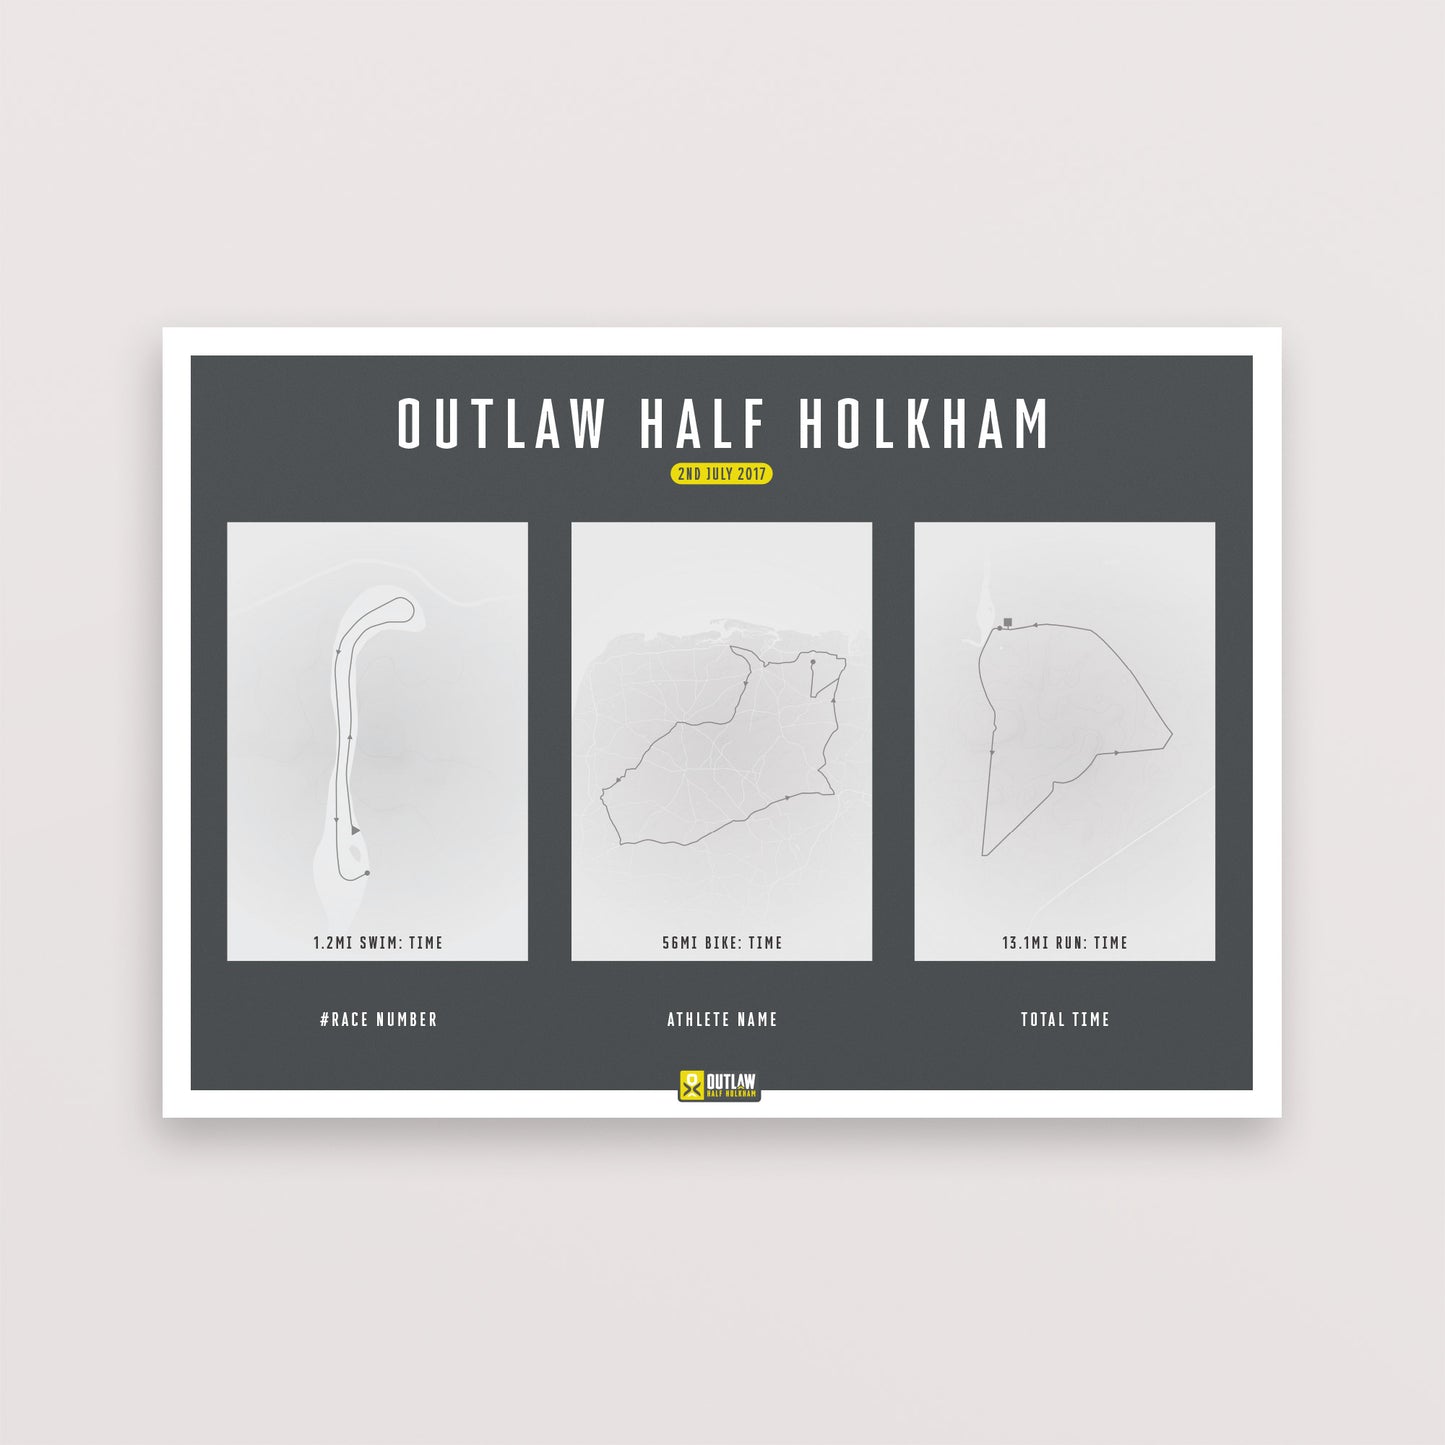 Outlaw Half Holkham – Poster – The English Cyclist